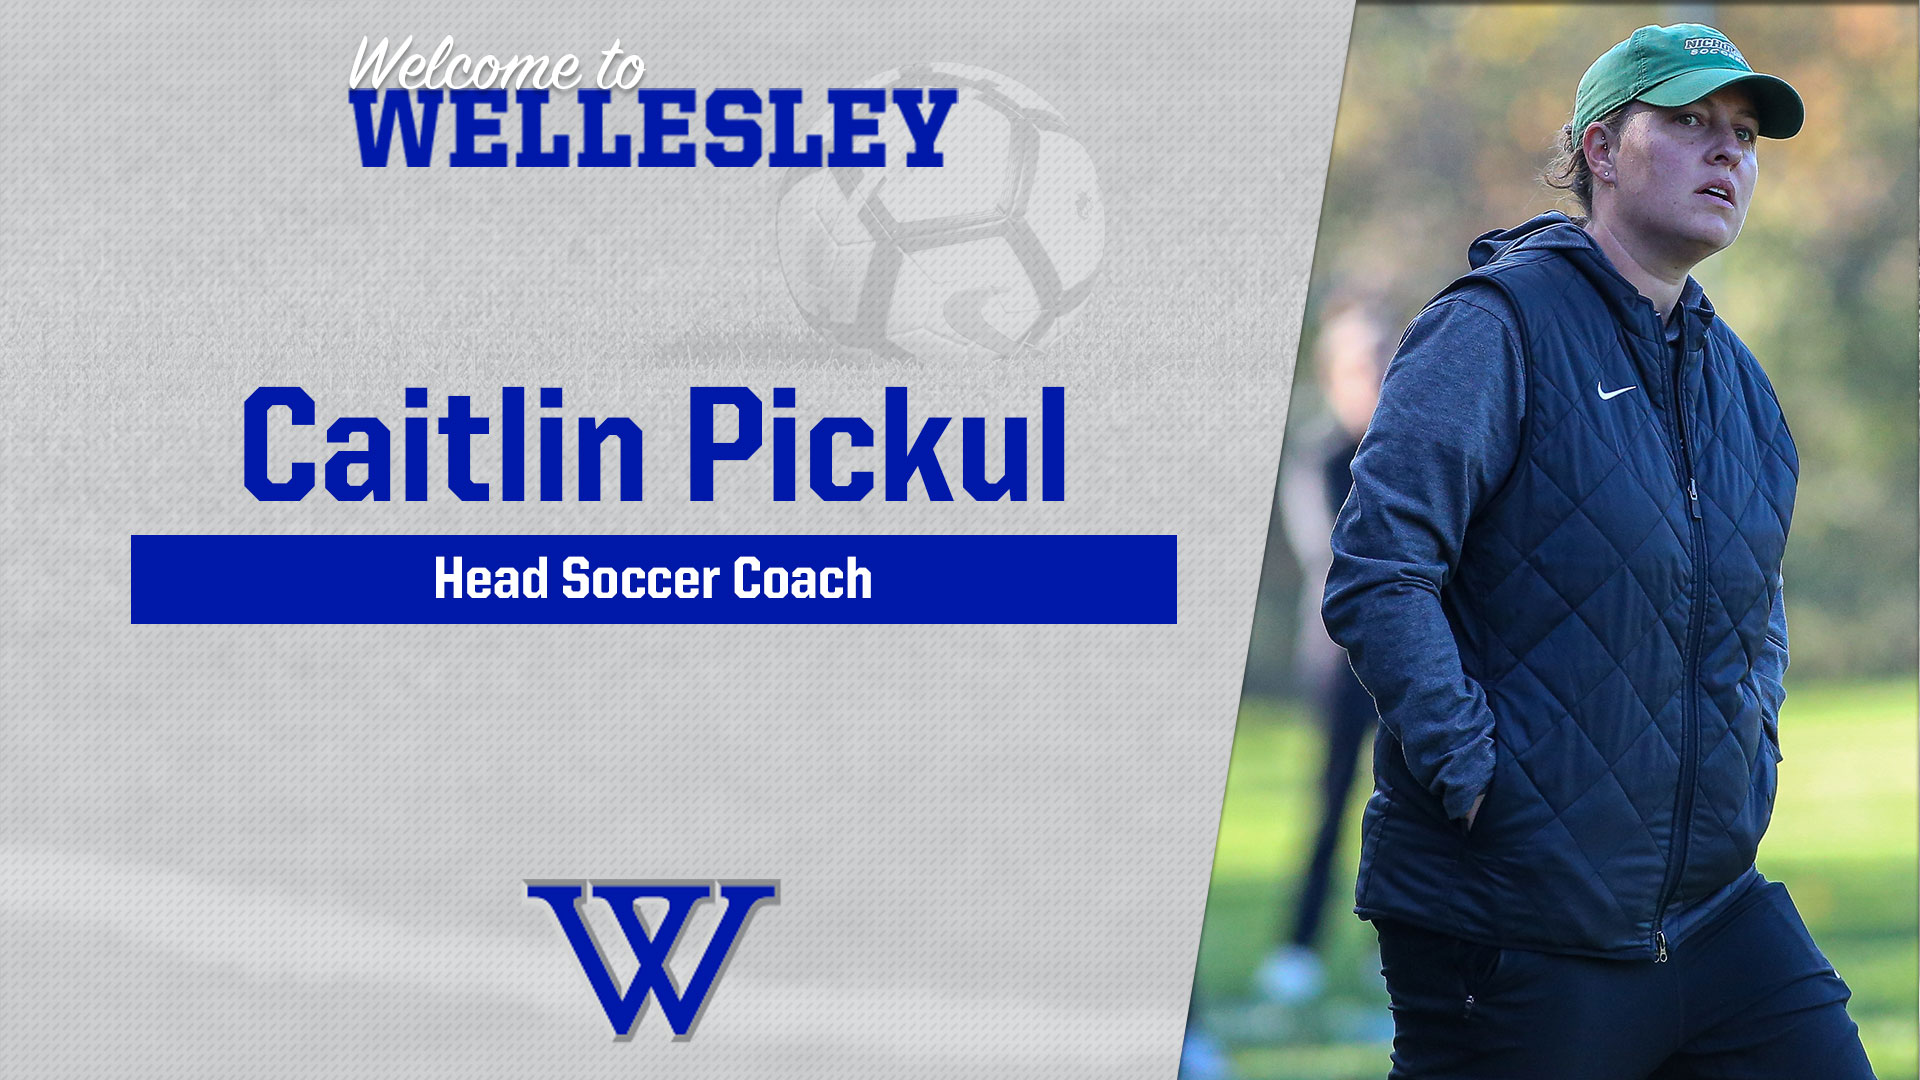 Caitlin Pickul Named Head Soccer Coach at Wellesley College